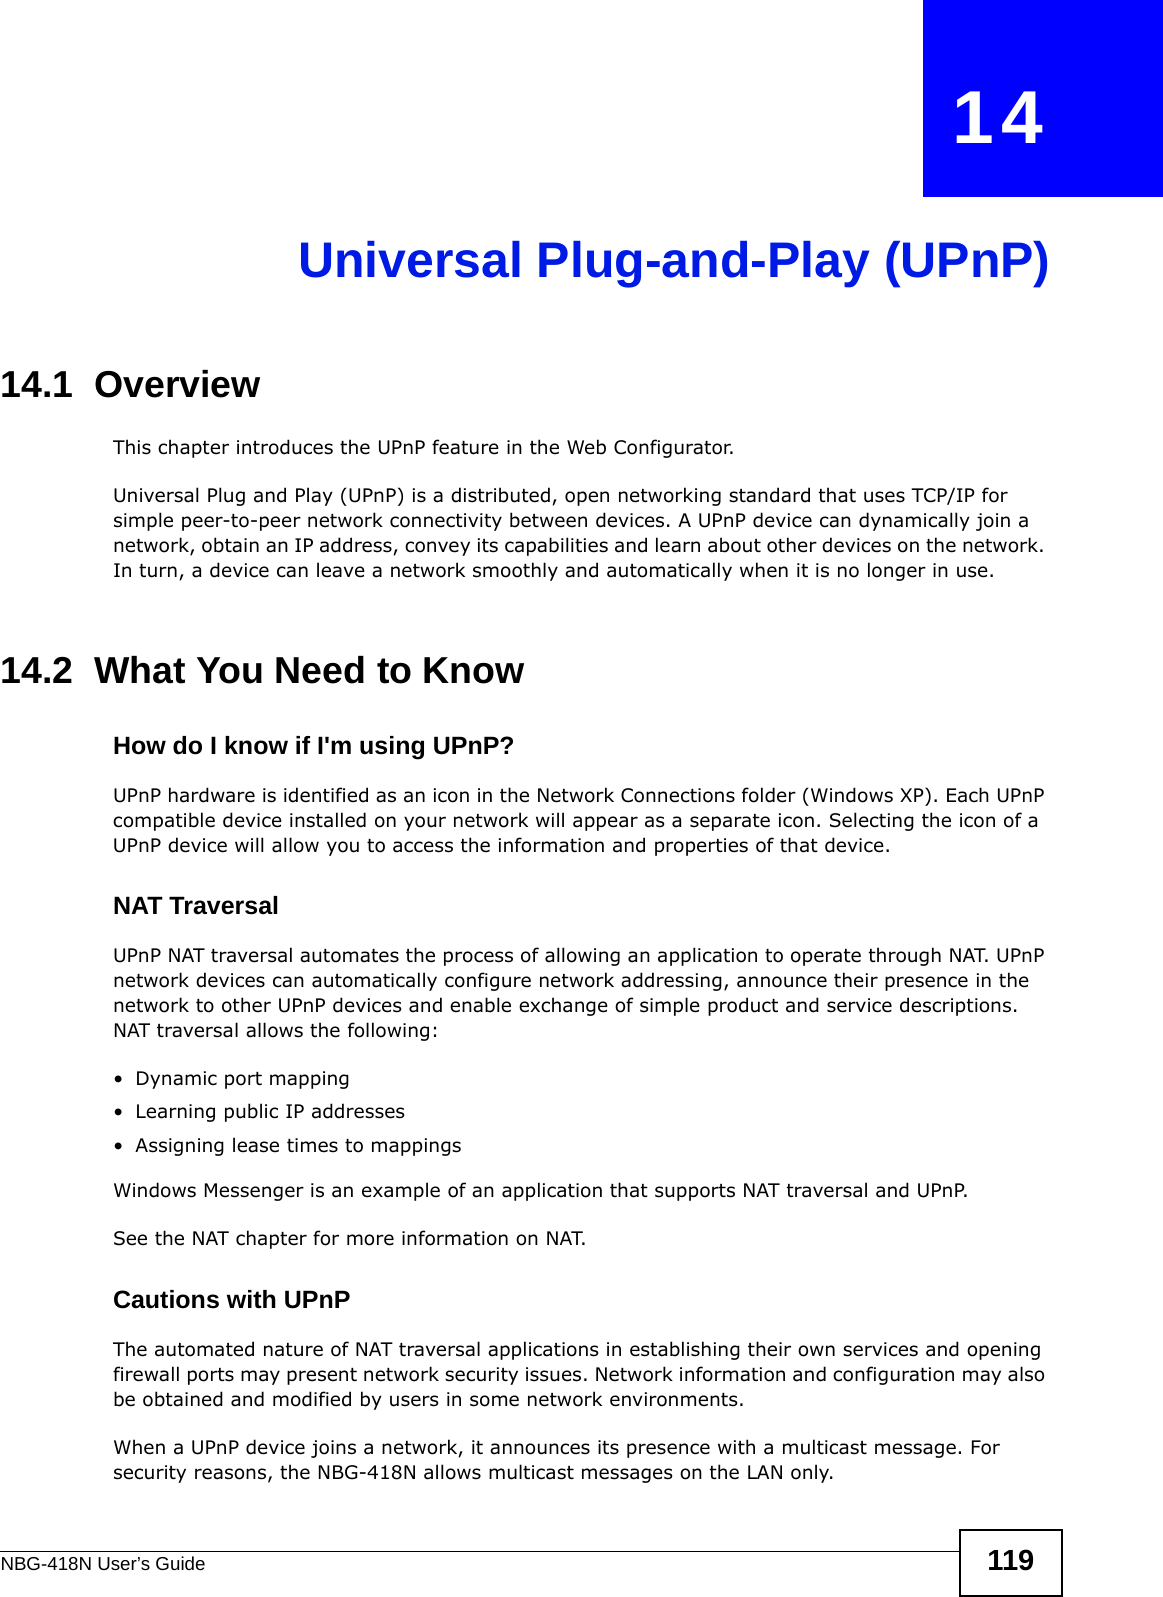 NBG-418N User’s Guide 119CHAPTER   14Universal Plug-and-Play (UPnP)14.1  Overview This chapter introduces the UPnP feature in the Web Configurator.Universal Plug and Play (UPnP) is a distributed, open networking standard that uses TCP/IP for simple peer-to-peer network connectivity between devices. A UPnP device can dynamically join a network, obtain an IP address, convey its capabilities and learn about other devices on the network. In turn, a device can leave a network smoothly and automatically when it is no longer in use.14.2  What You Need to KnowHow do I know if I&apos;m using UPnP? UPnP hardware is identified as an icon in the Network Connections folder (Windows XP). Each UPnP compatible device installed on your network will appear as a separate icon. Selecting the icon of a UPnP device will allow you to access the information and properties of that device. NAT TraversalUPnP NAT traversal automates the process of allowing an application to operate through NAT. UPnP network devices can automatically configure network addressing, announce their presence in the network to other UPnP devices and enable exchange of simple product and service descriptions. NAT traversal allows the following:• Dynamic port mapping• Learning public IP addresses• Assigning lease times to mappingsWindows Messenger is an example of an application that supports NAT traversal and UPnP. See the NAT chapter for more information on NAT.Cautions with UPnPThe automated nature of NAT traversal applications in establishing their own services and opening firewall ports may present network security issues. Network information and configuration may also be obtained and modified by users in some network environments. When a UPnP device joins a network, it announces its presence with a multicast message. For security reasons, the NBG-418N allows multicast messages on the LAN only.